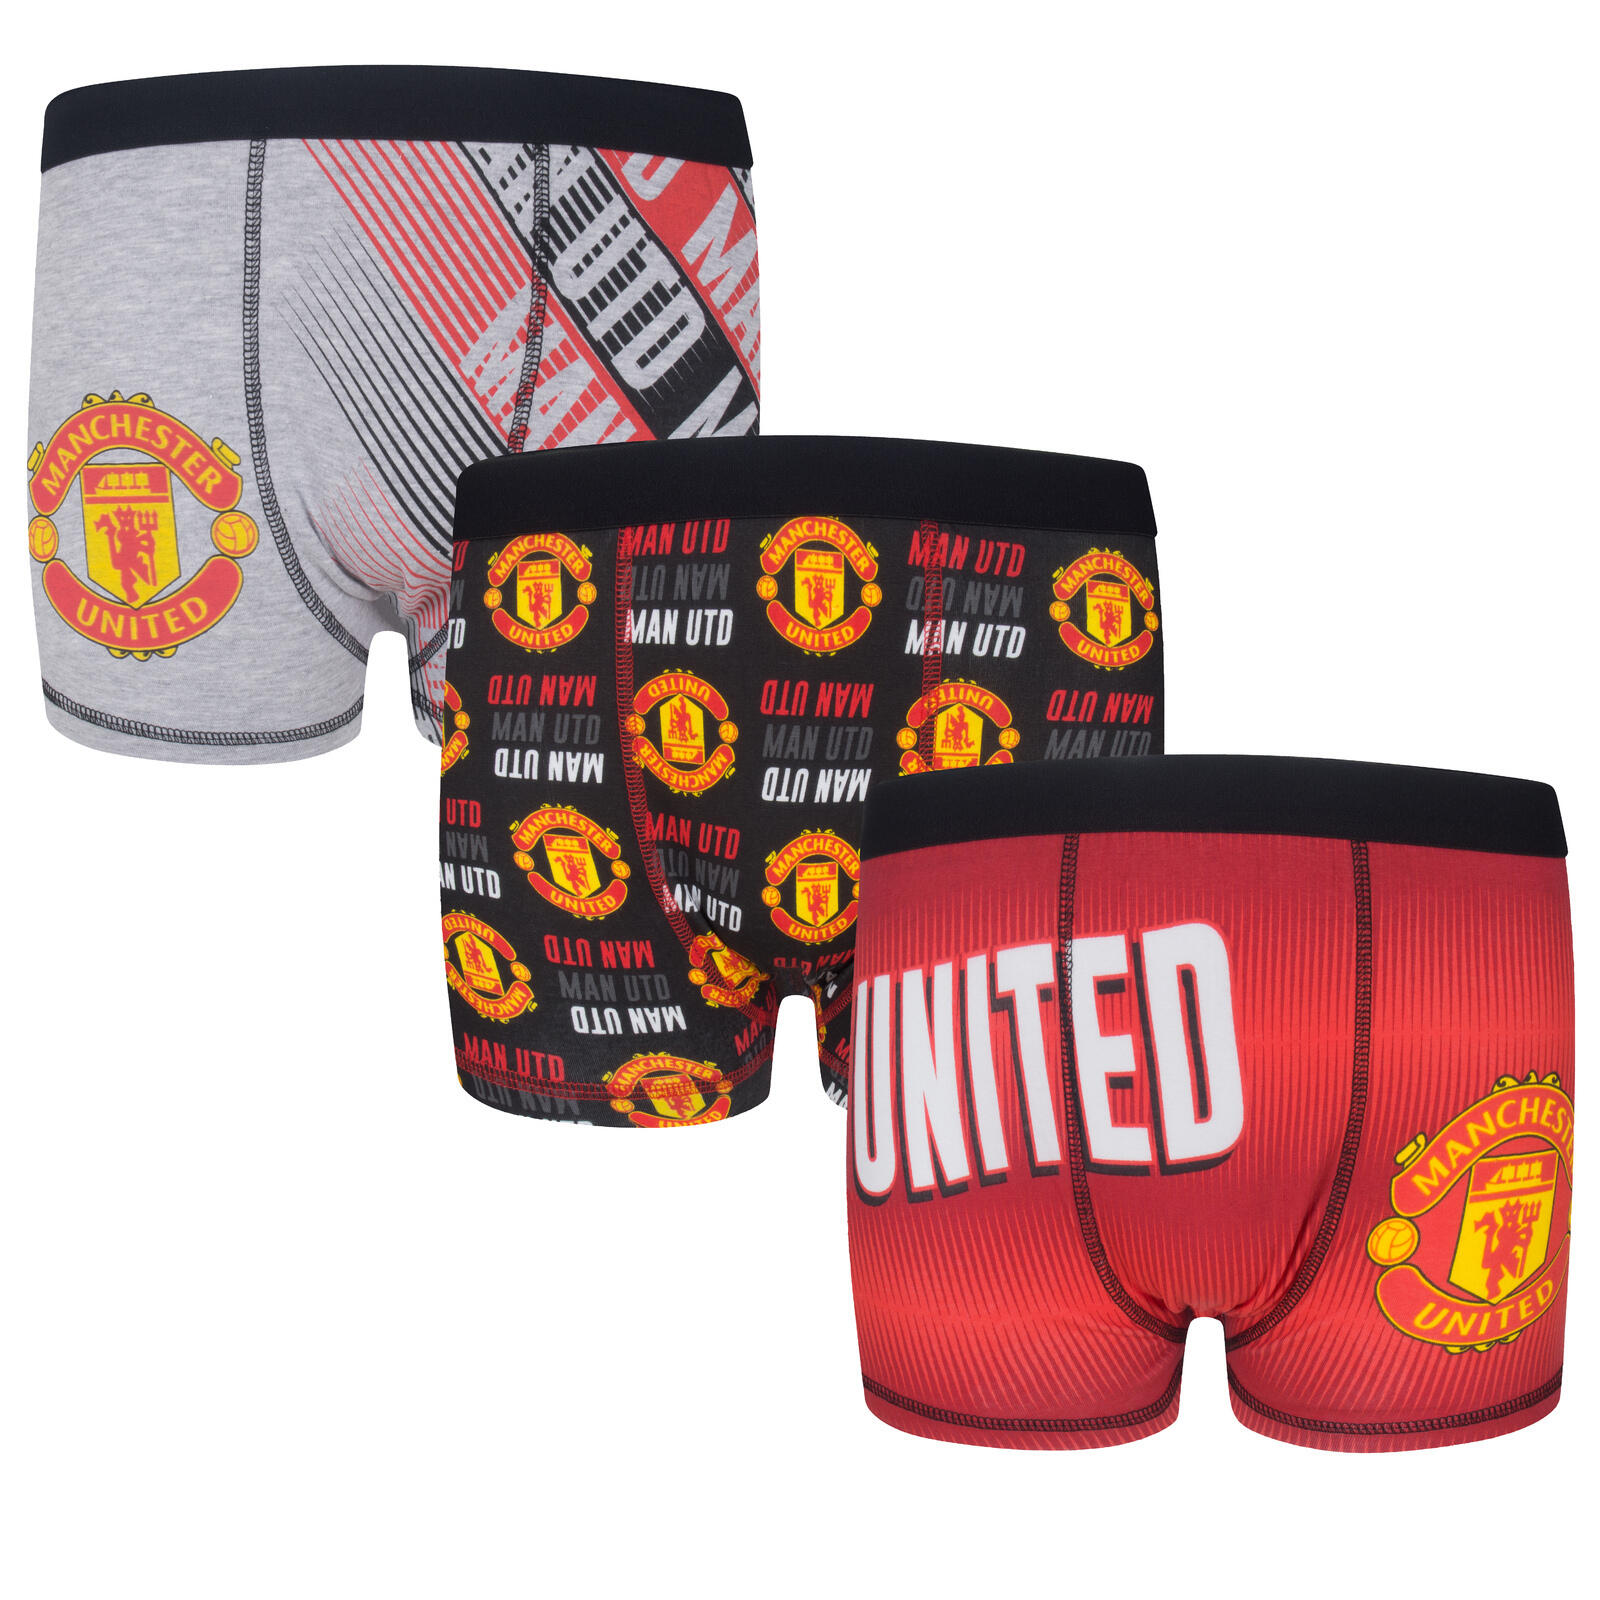 MANCHESTER UNITED Manchester United Boys Boxer Shorts 3 Pack Crest Kids OFFICIAL Football Gift